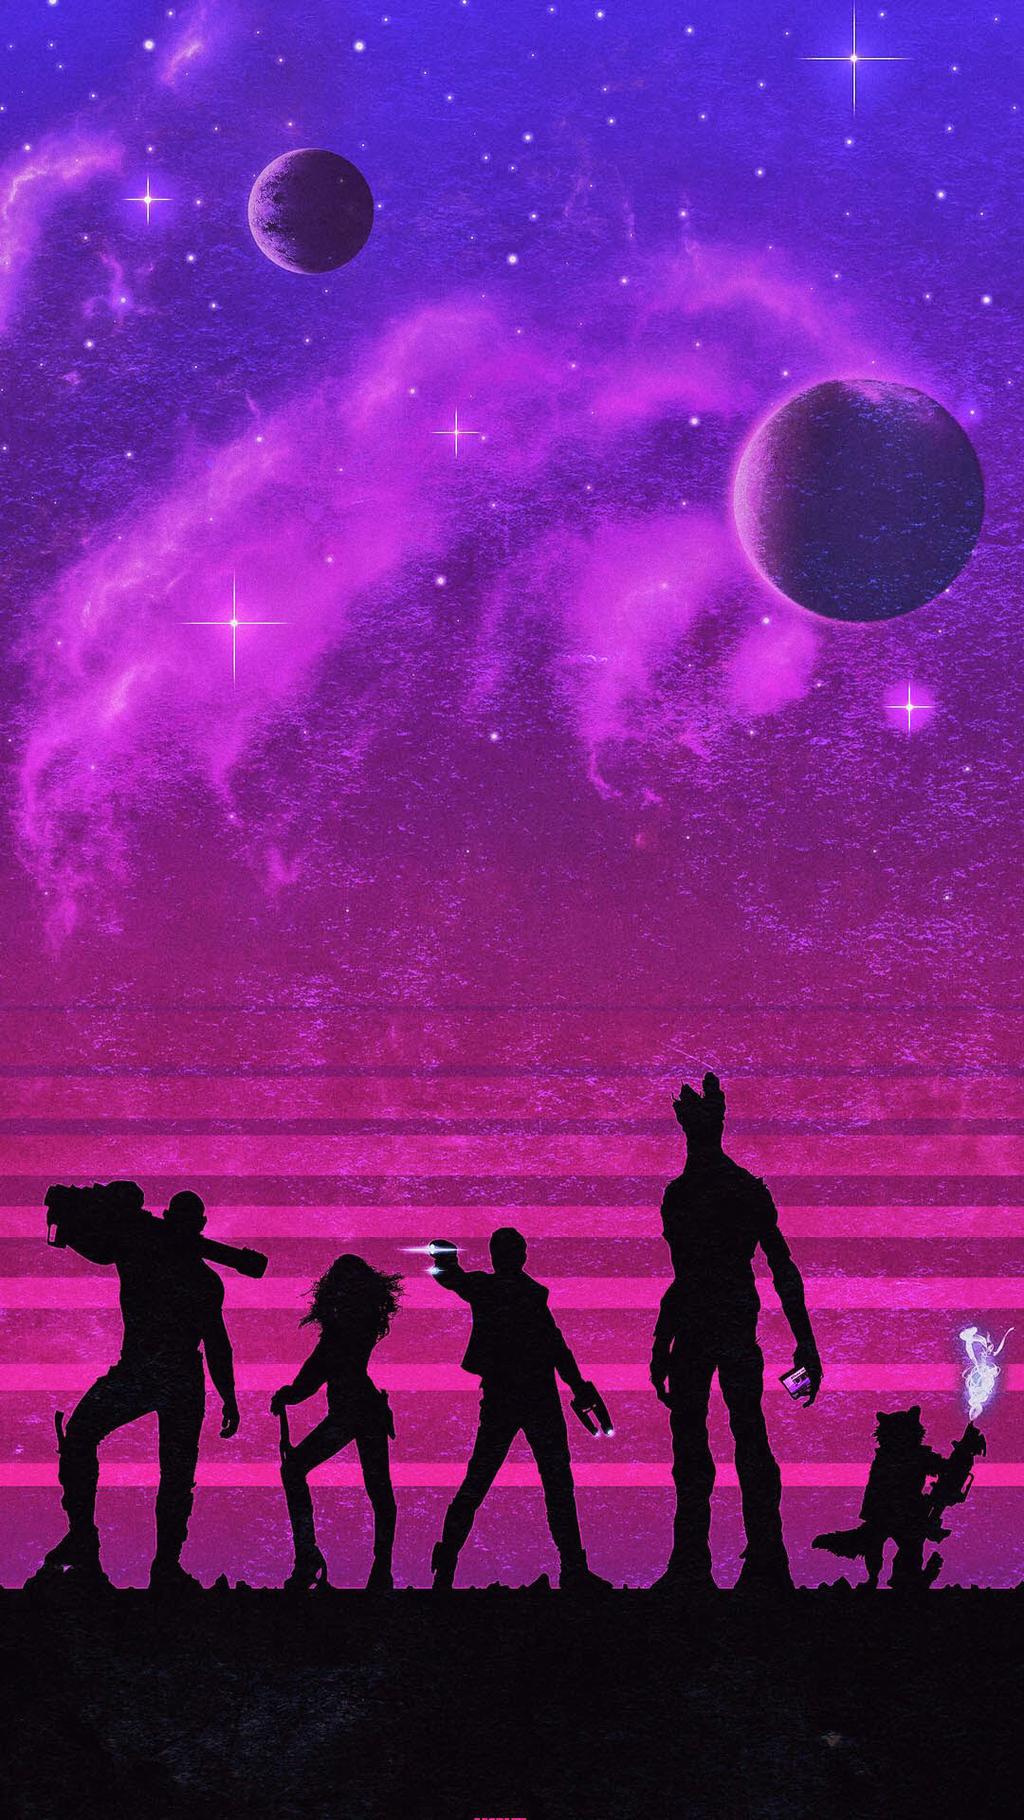 Guardians Of The Galaxy Wallpaper For iPhone And iPad